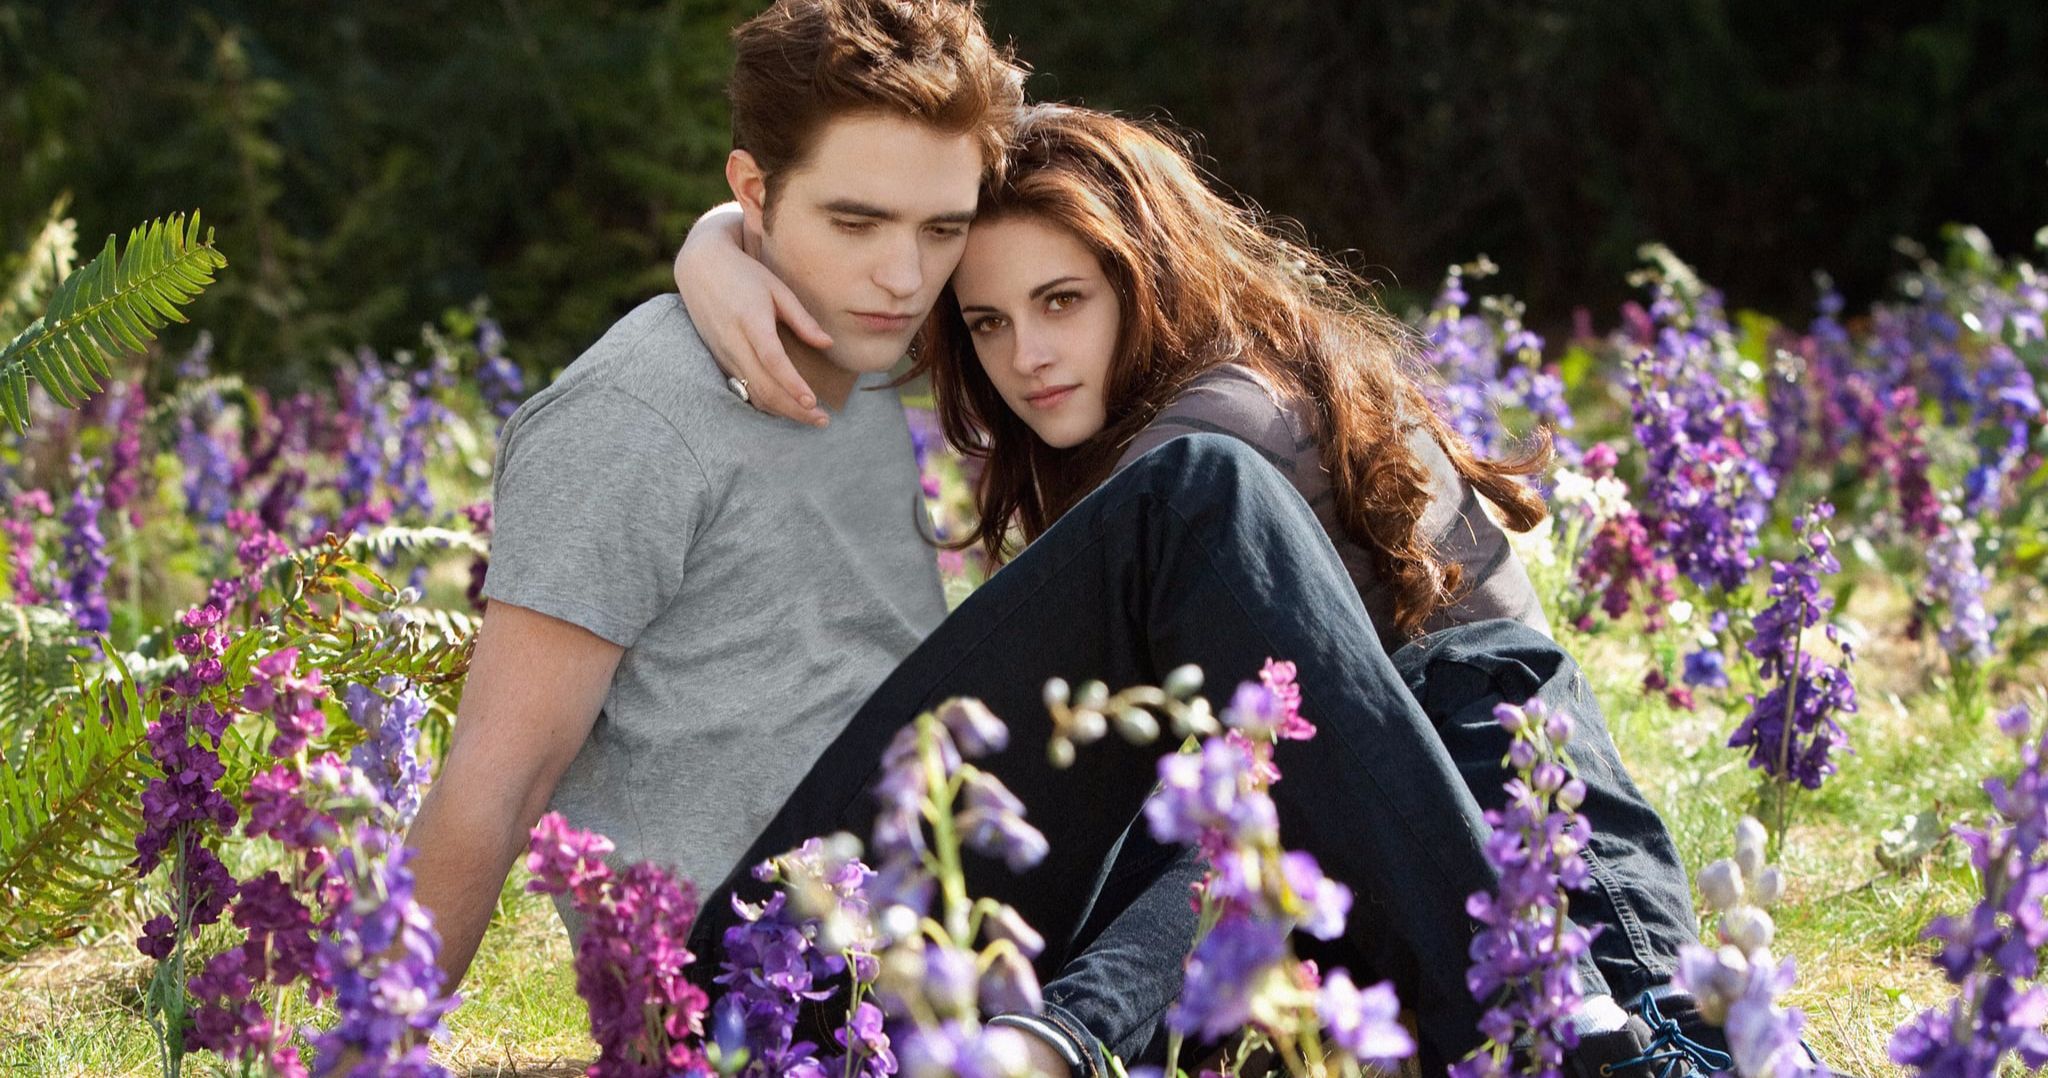 New Twilight Book Adds a Missing Scene That's Always Driven the Author Crazy